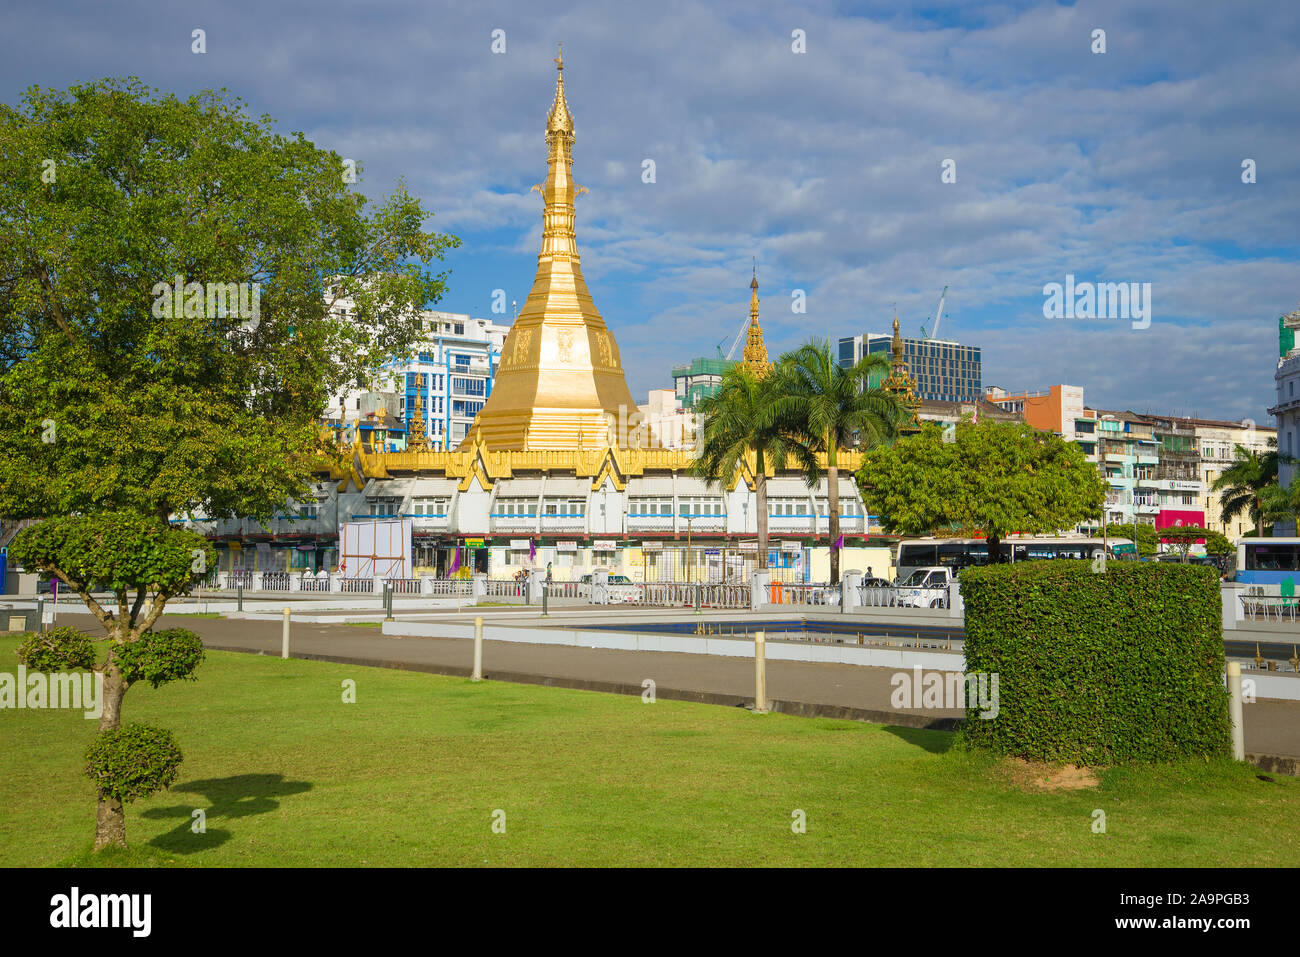 YANGON, MYANMAR - DECEMBER 17, 2016: Sule Pagoda in the cityscape on a cloudy day Stock Photo